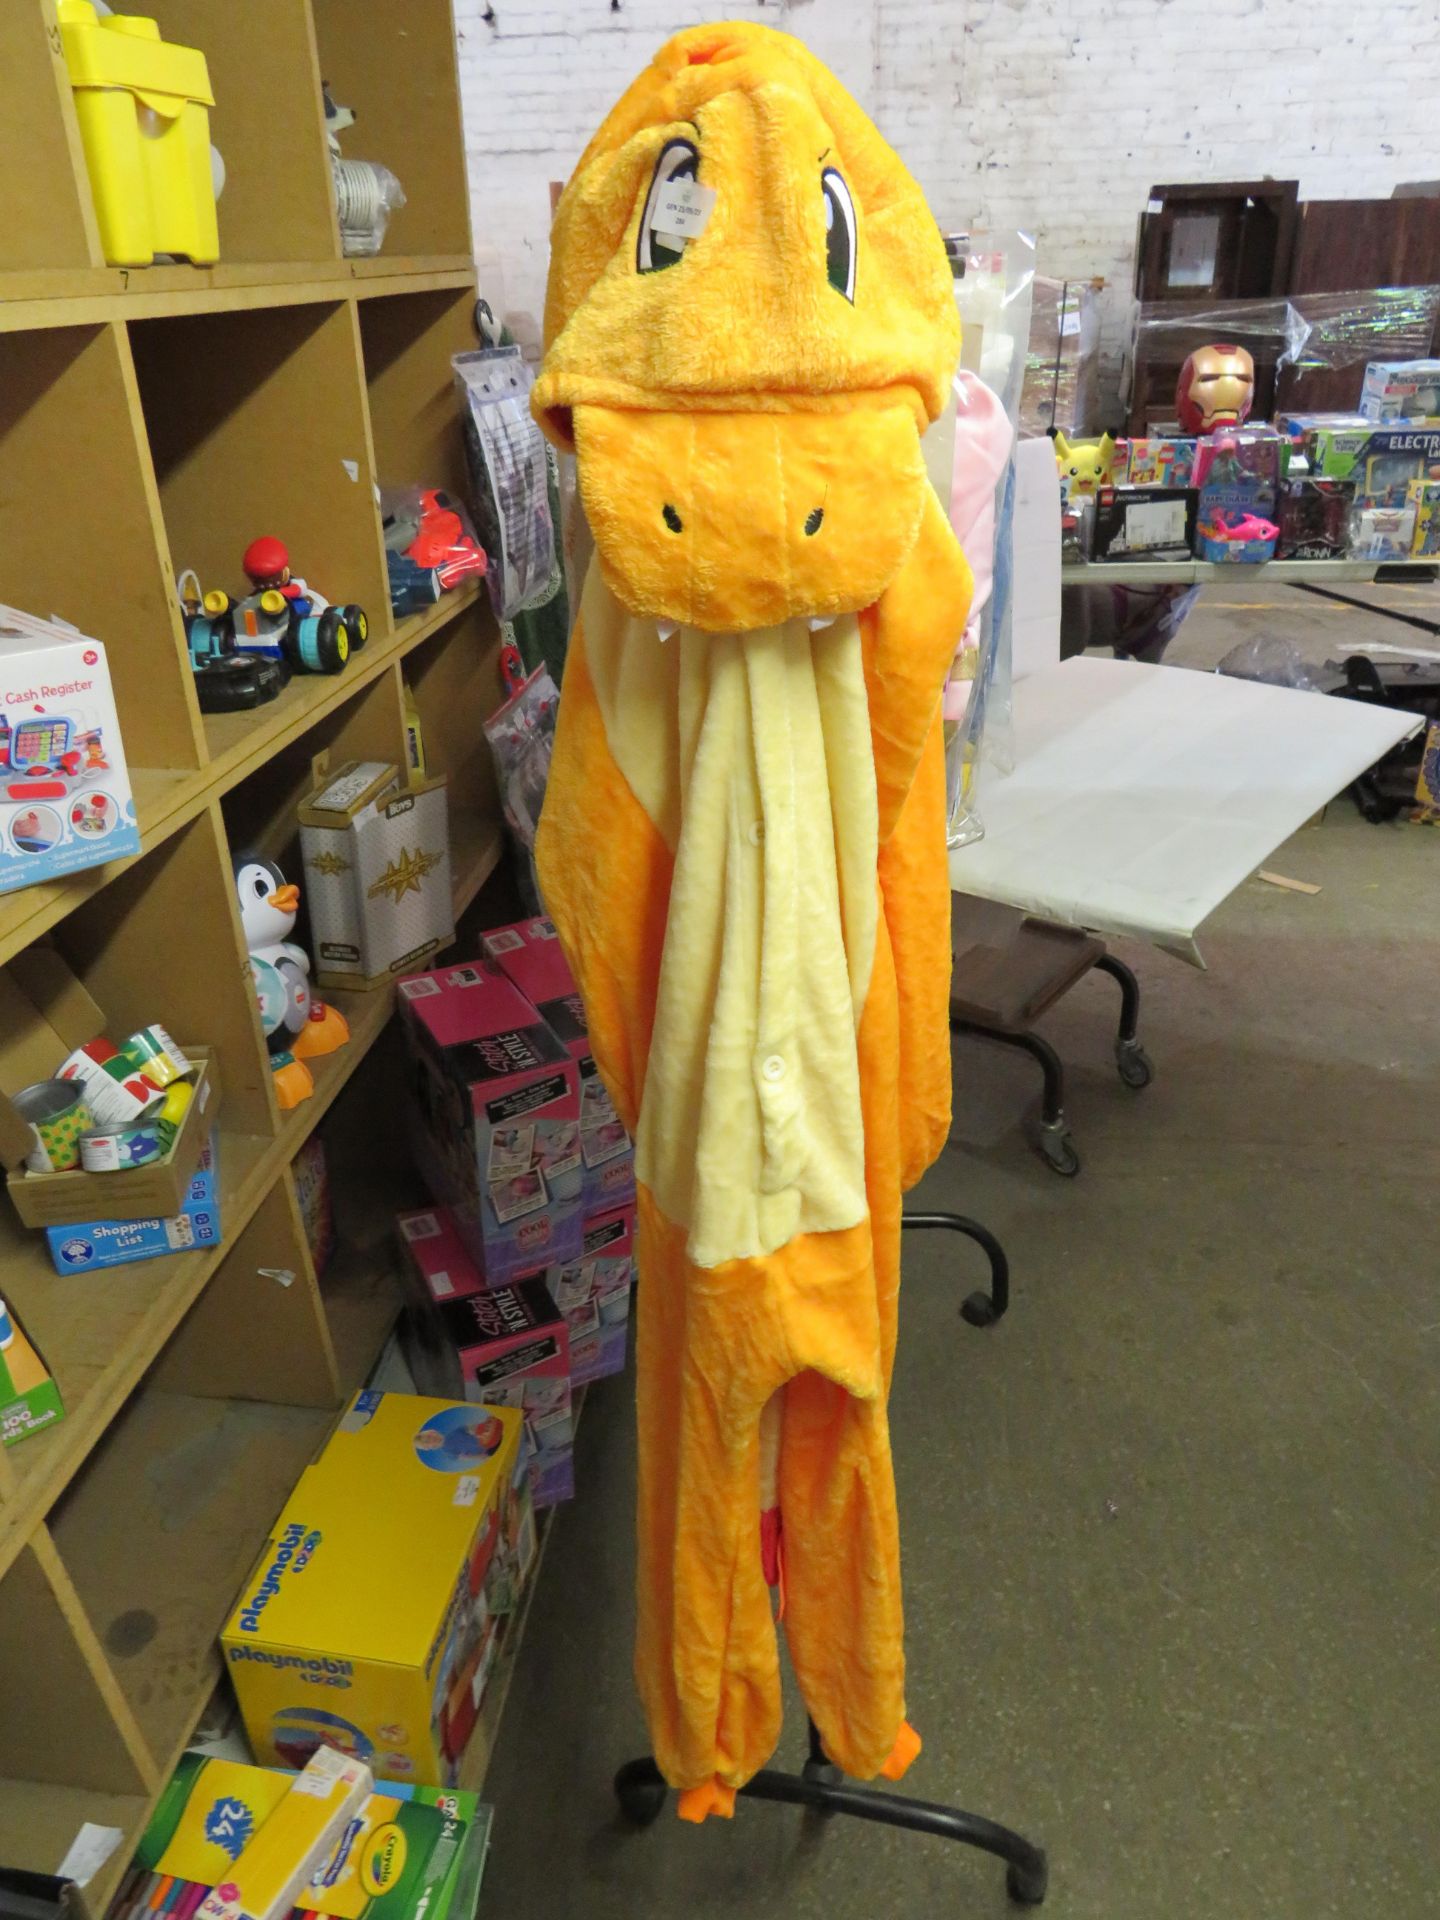 Dragon - All-in-one Costume - Size XL - No Packaging.